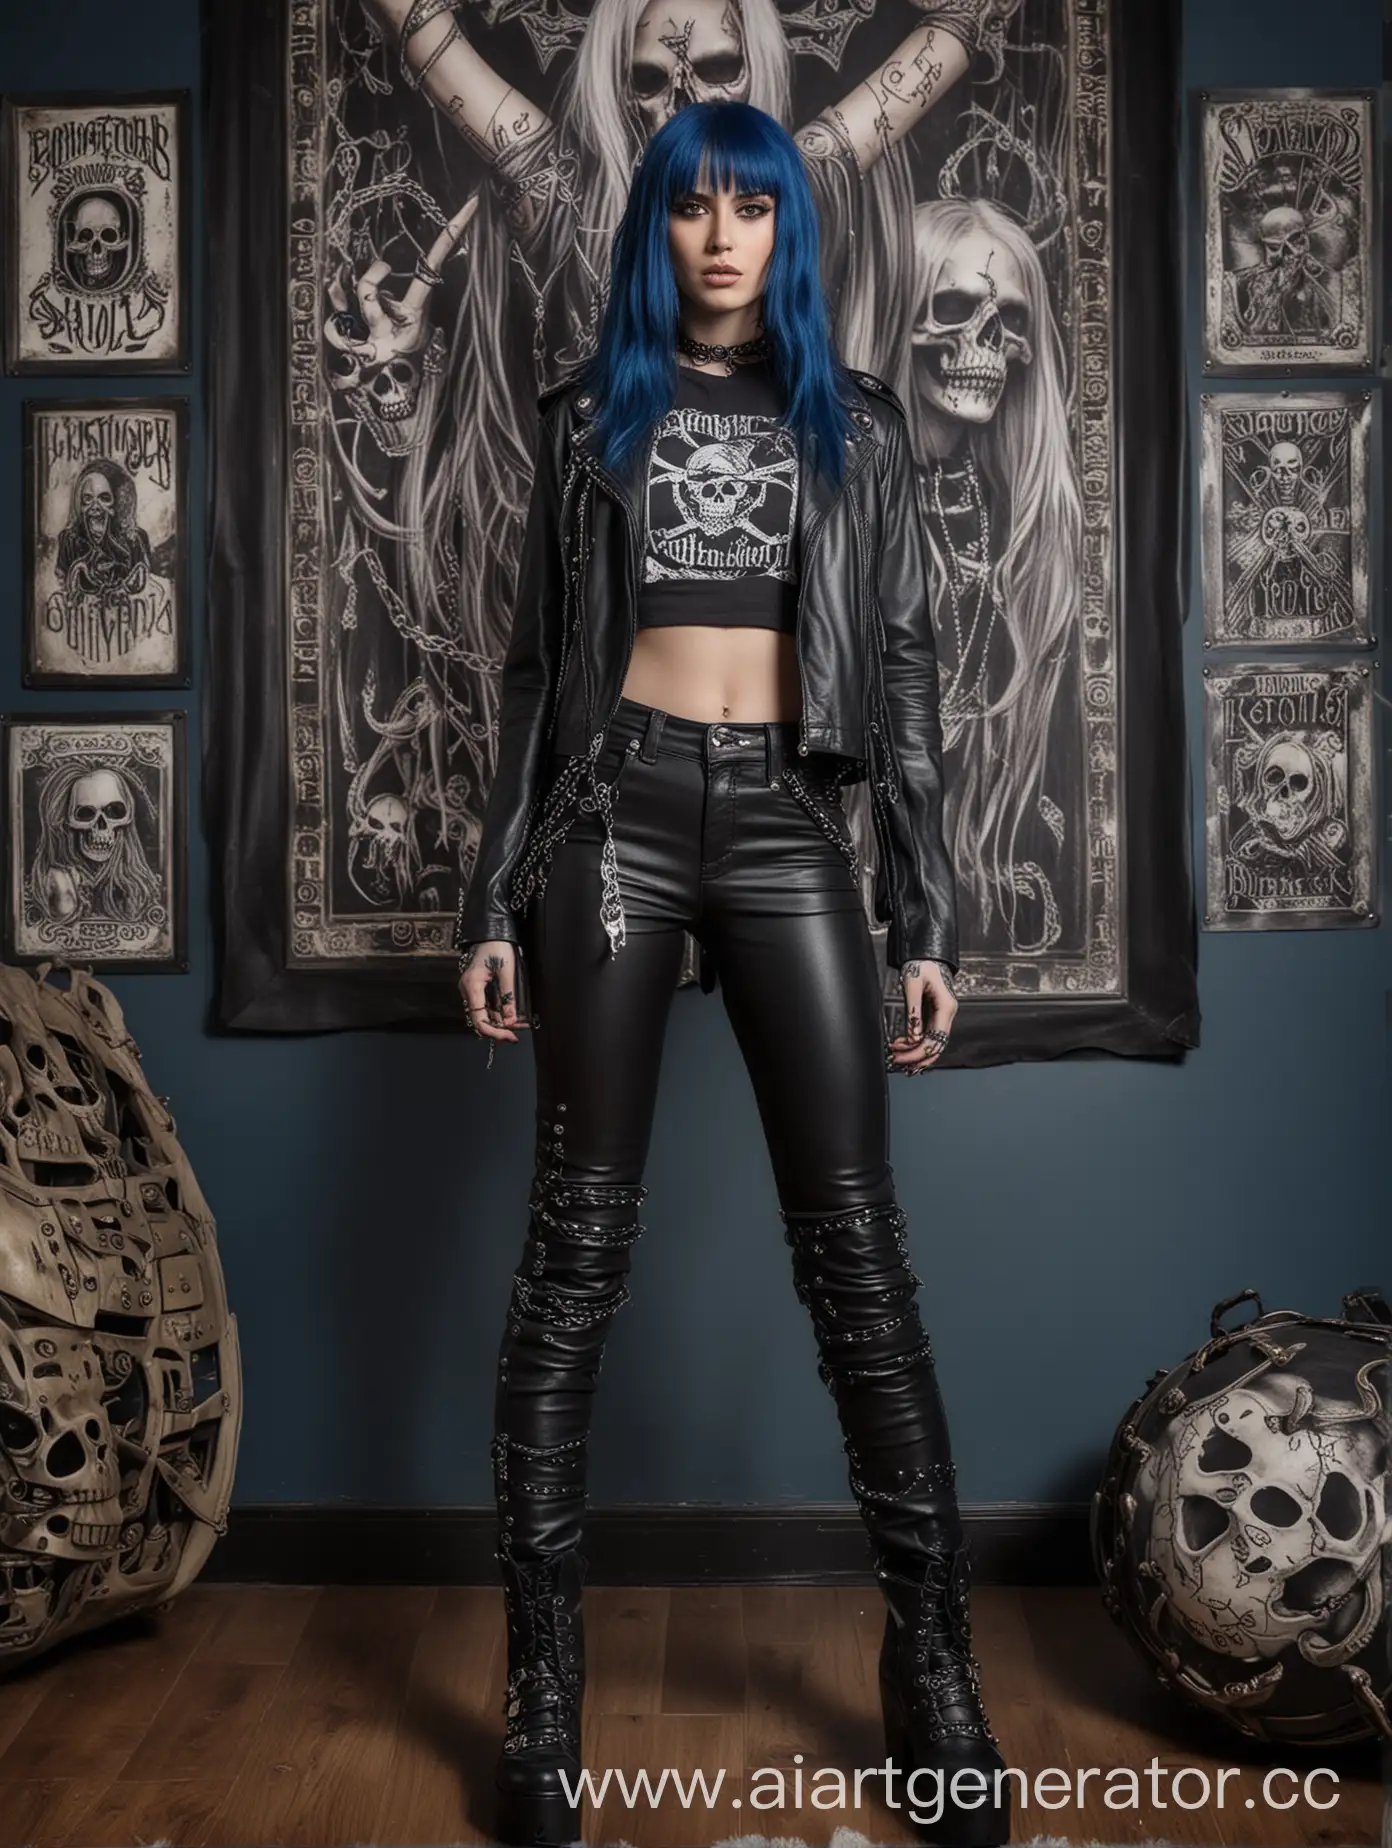 Gothic-Metal-Enthusiast-with-Slayer-Band-Top-and-Skull-Tattoos